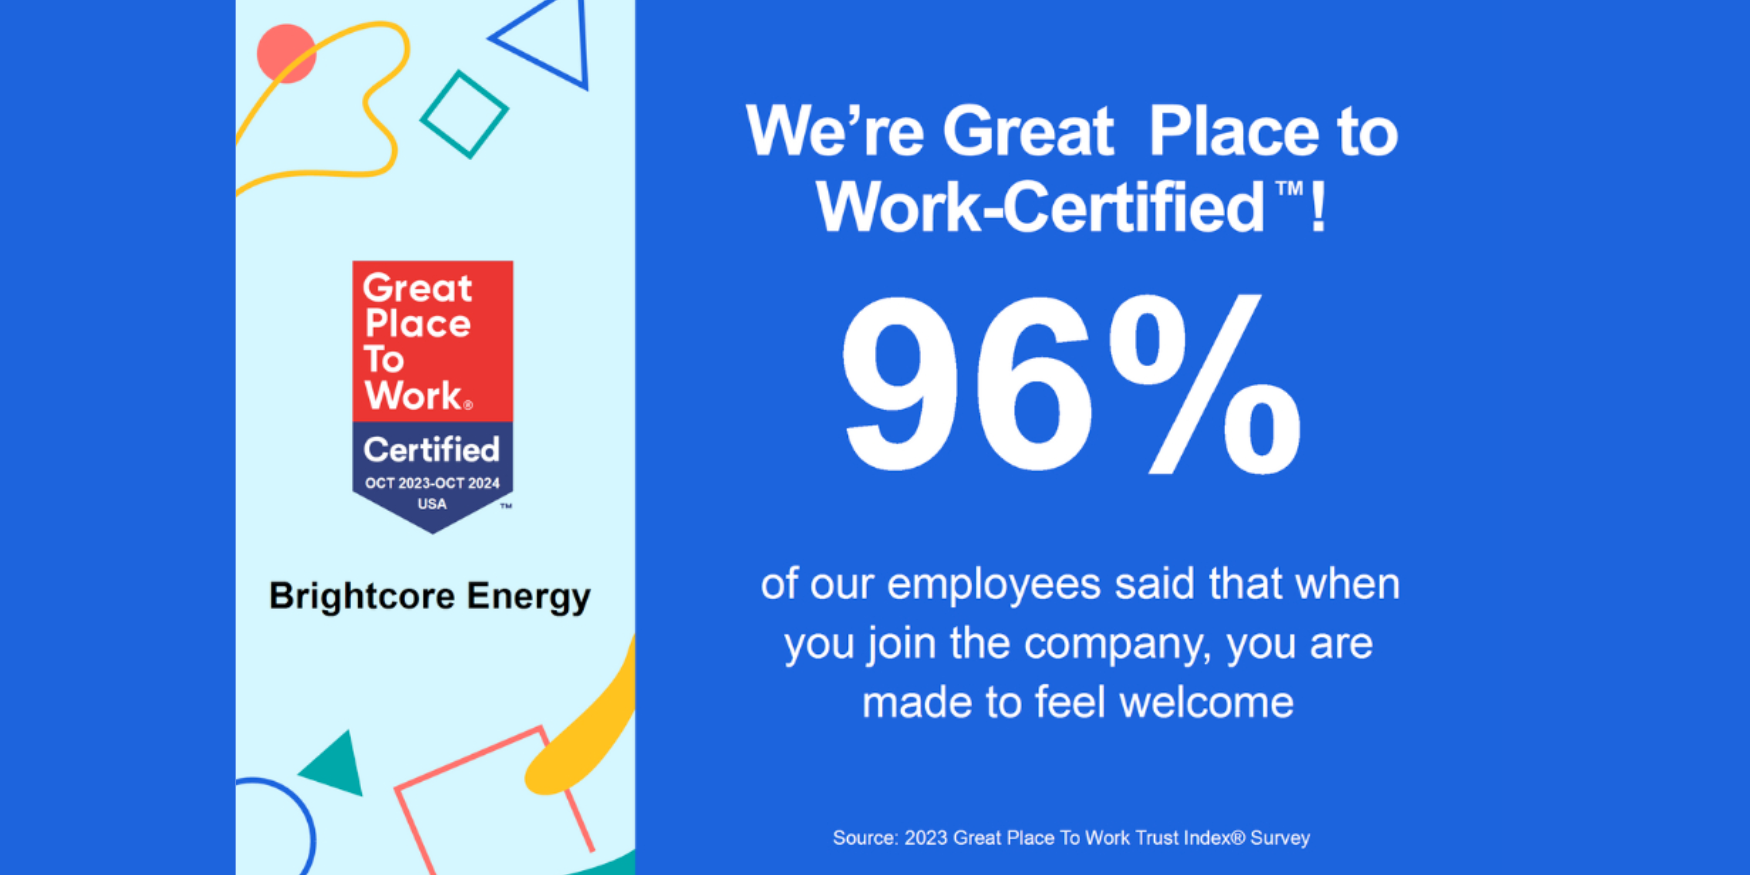 Brightcore Energy Earns Great Place to Work Certification